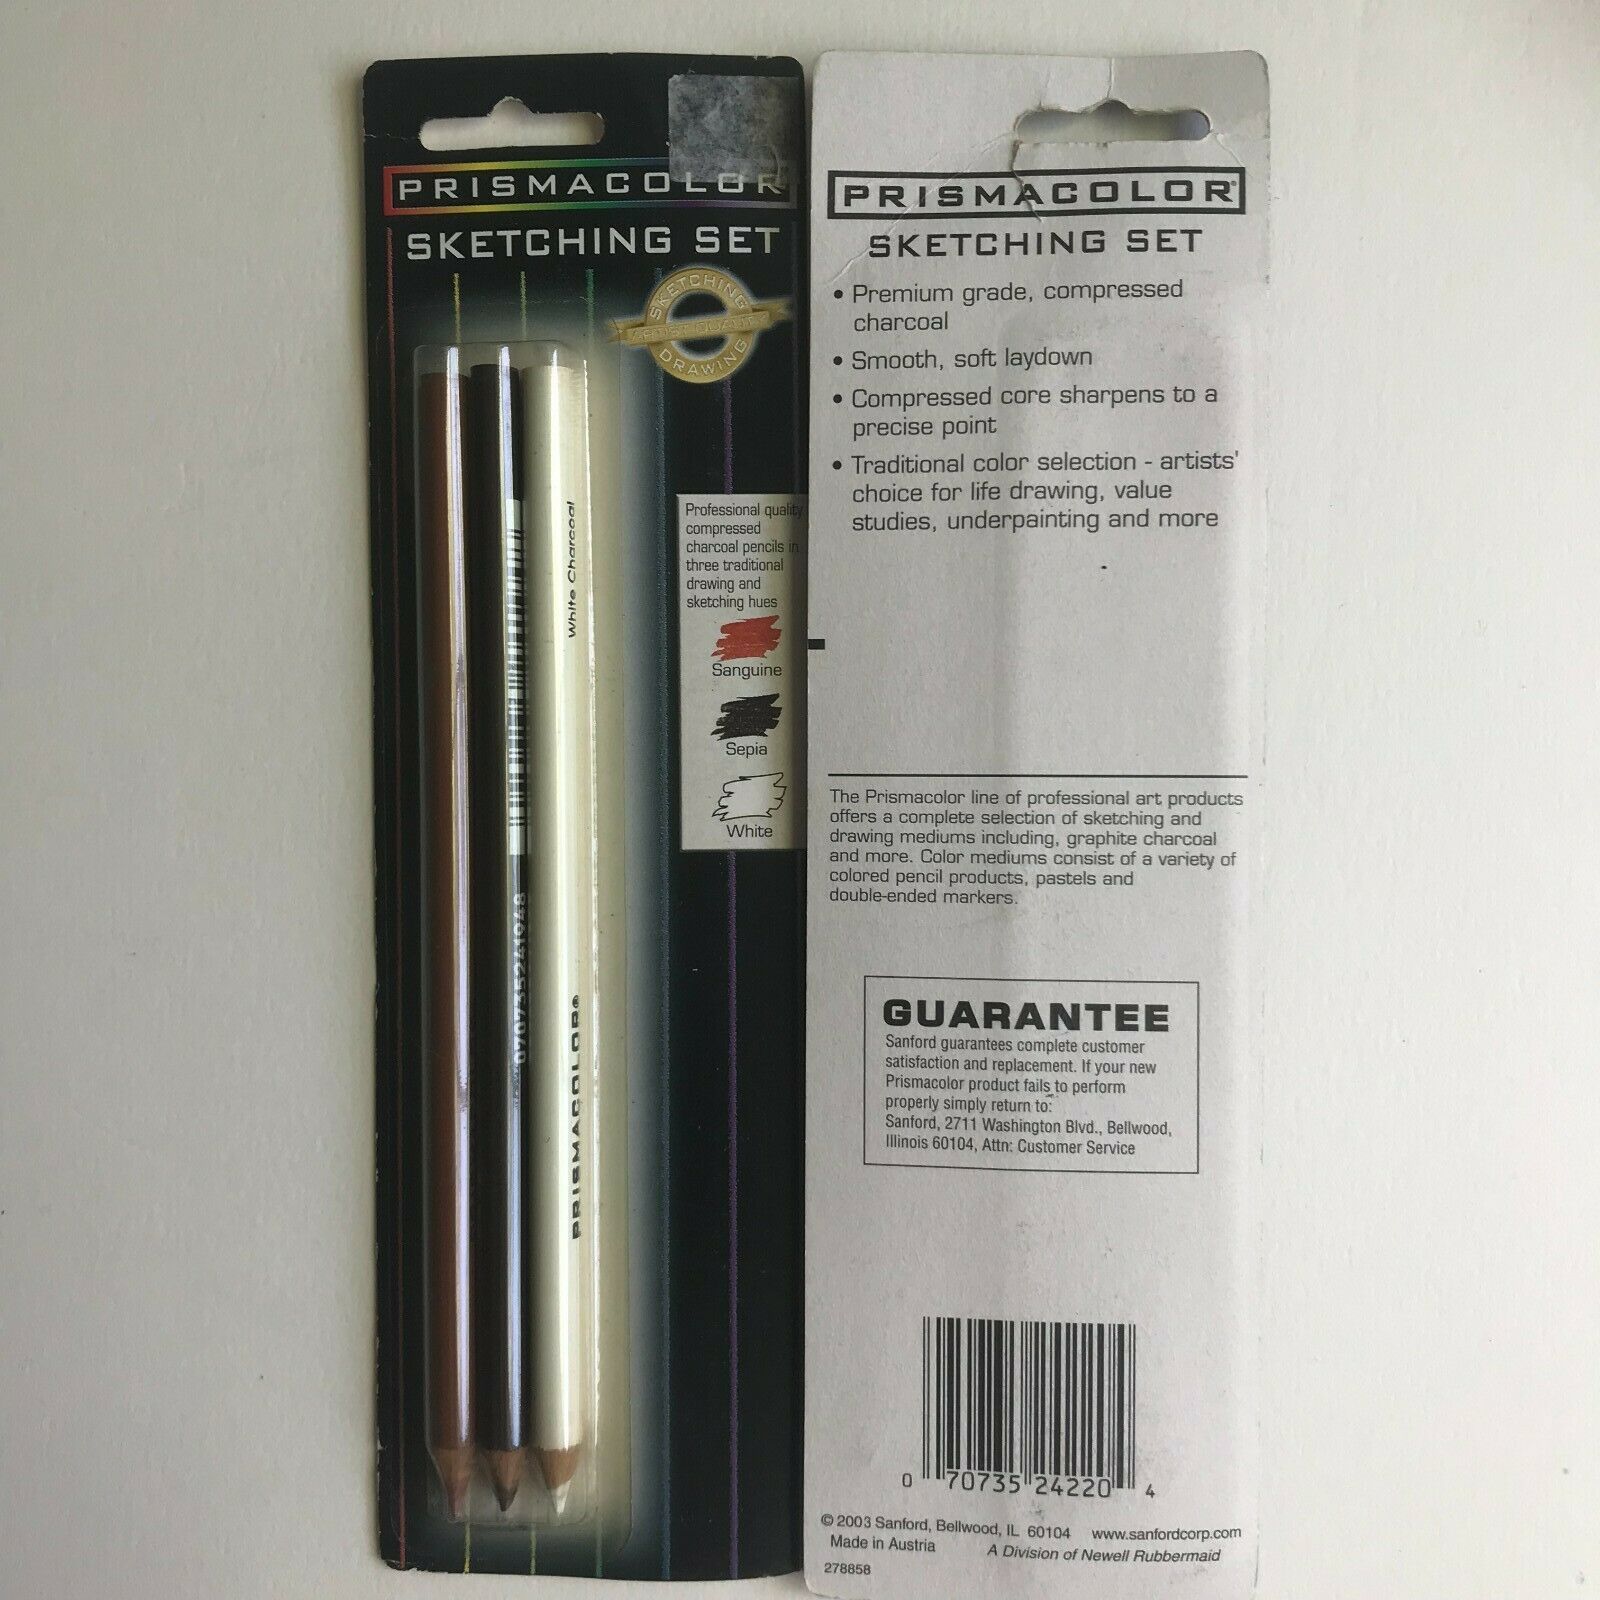 Primary image for Prismacolor Sketching Set Charcoal Pencils